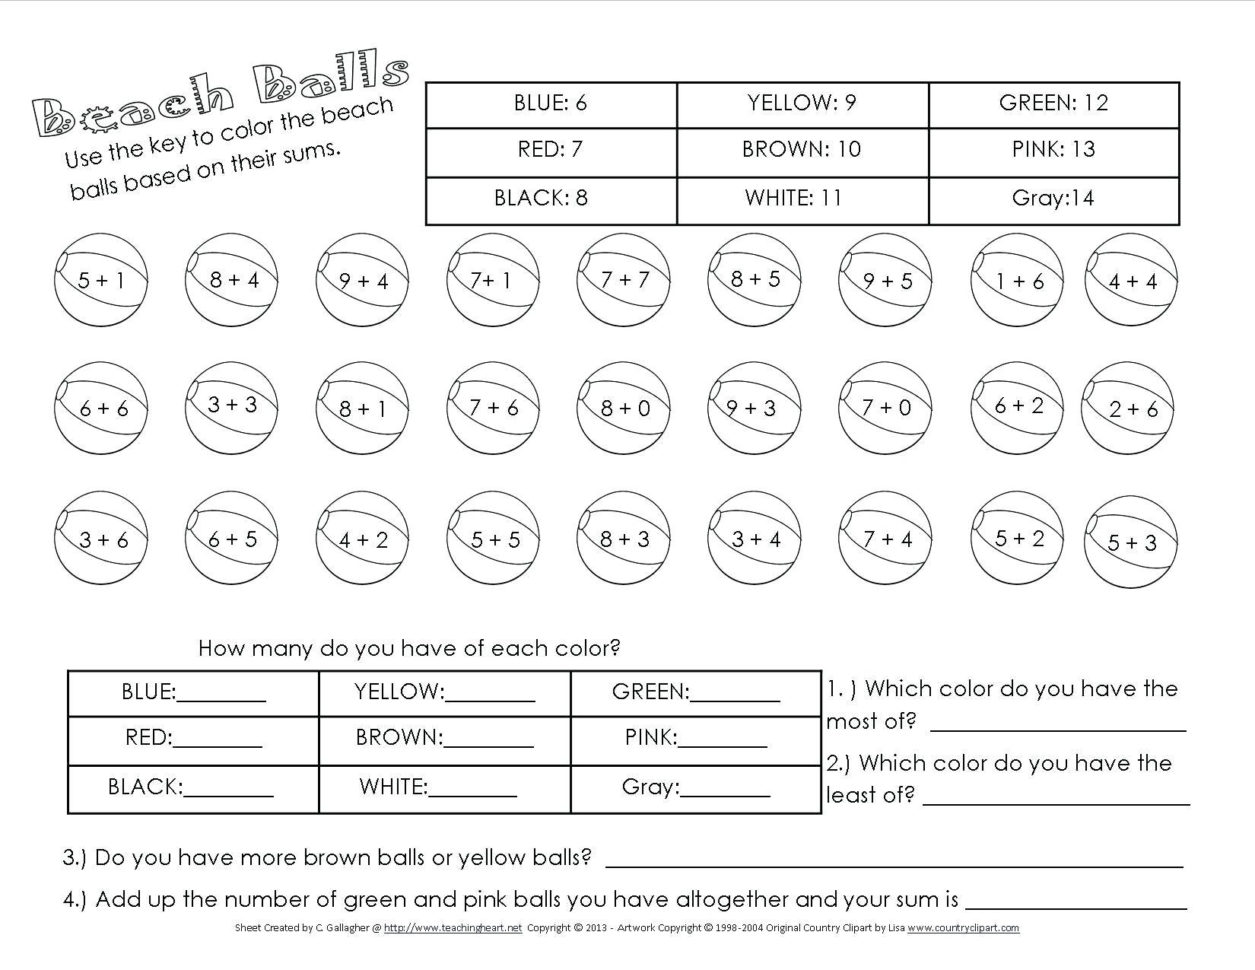 fun-summer-worksheets-for-4th-grade-db-excel